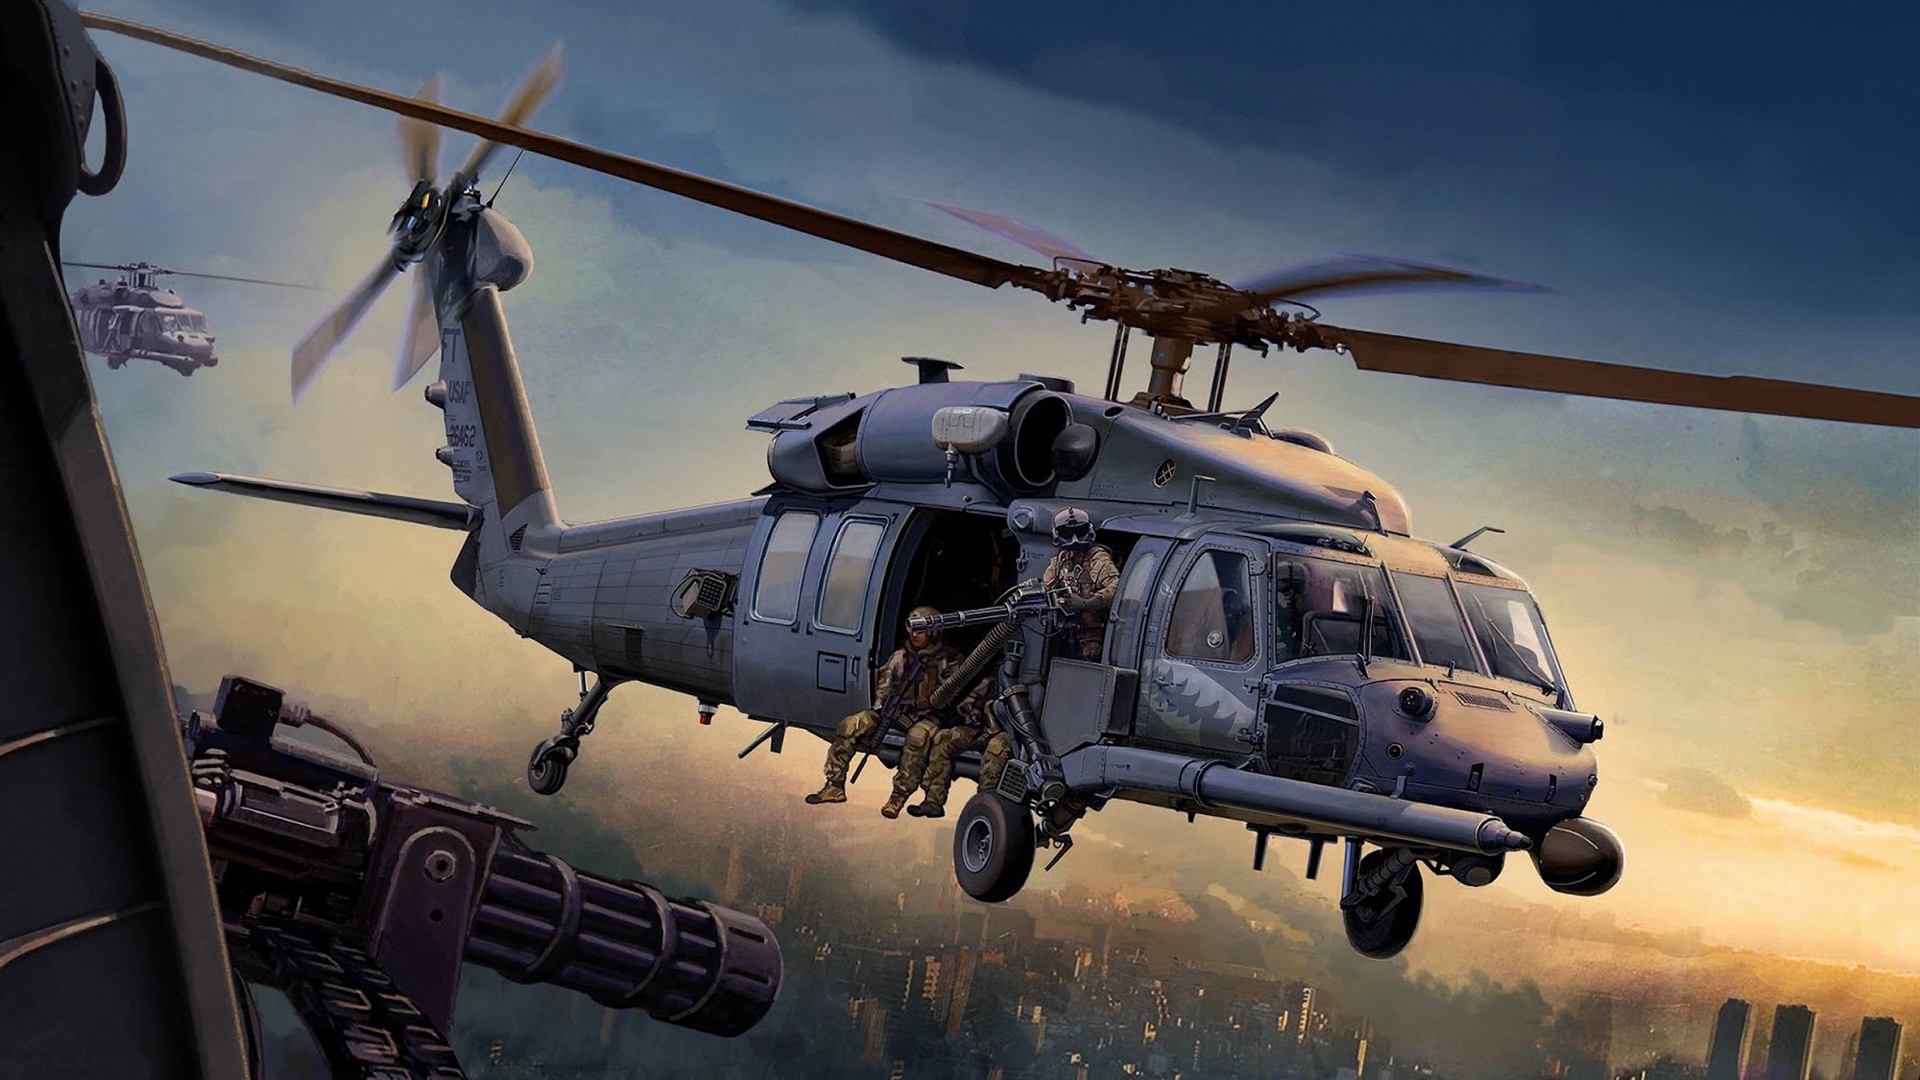 Military Sikorsky HH-60 Pave Hawk Wallpaper